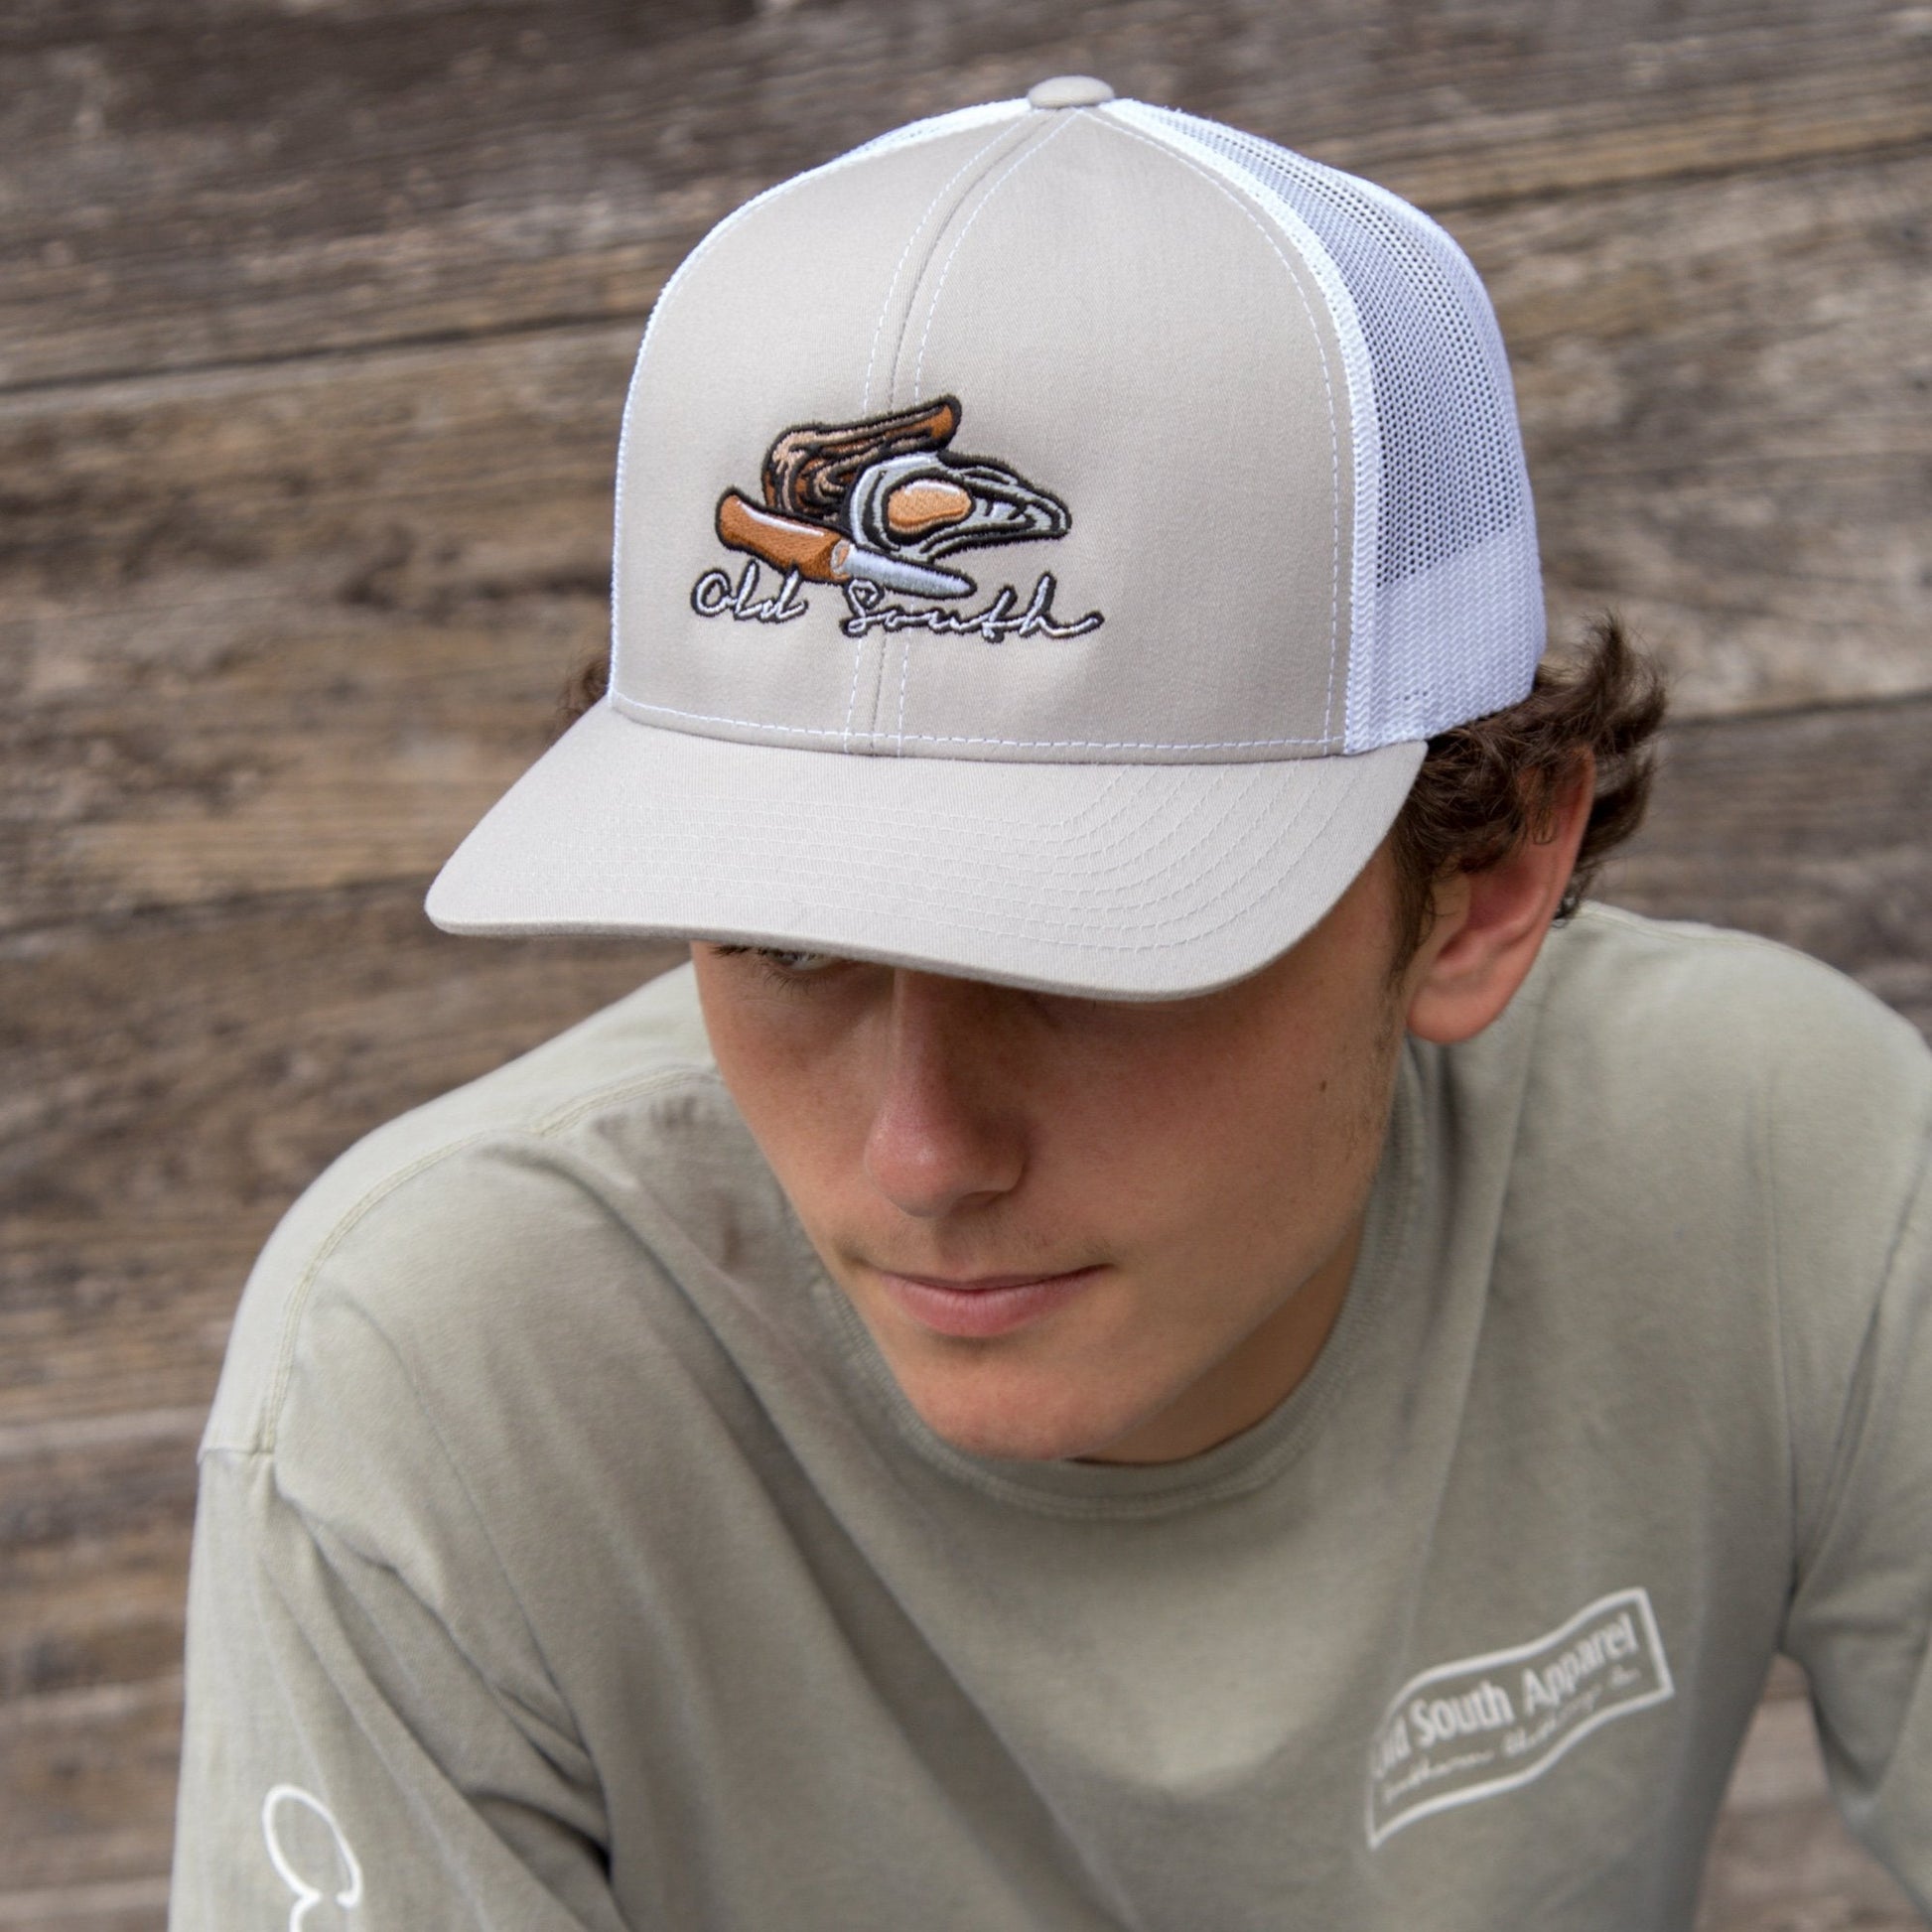 OldSouthApparel_Oyster Opener - Trucker Hat